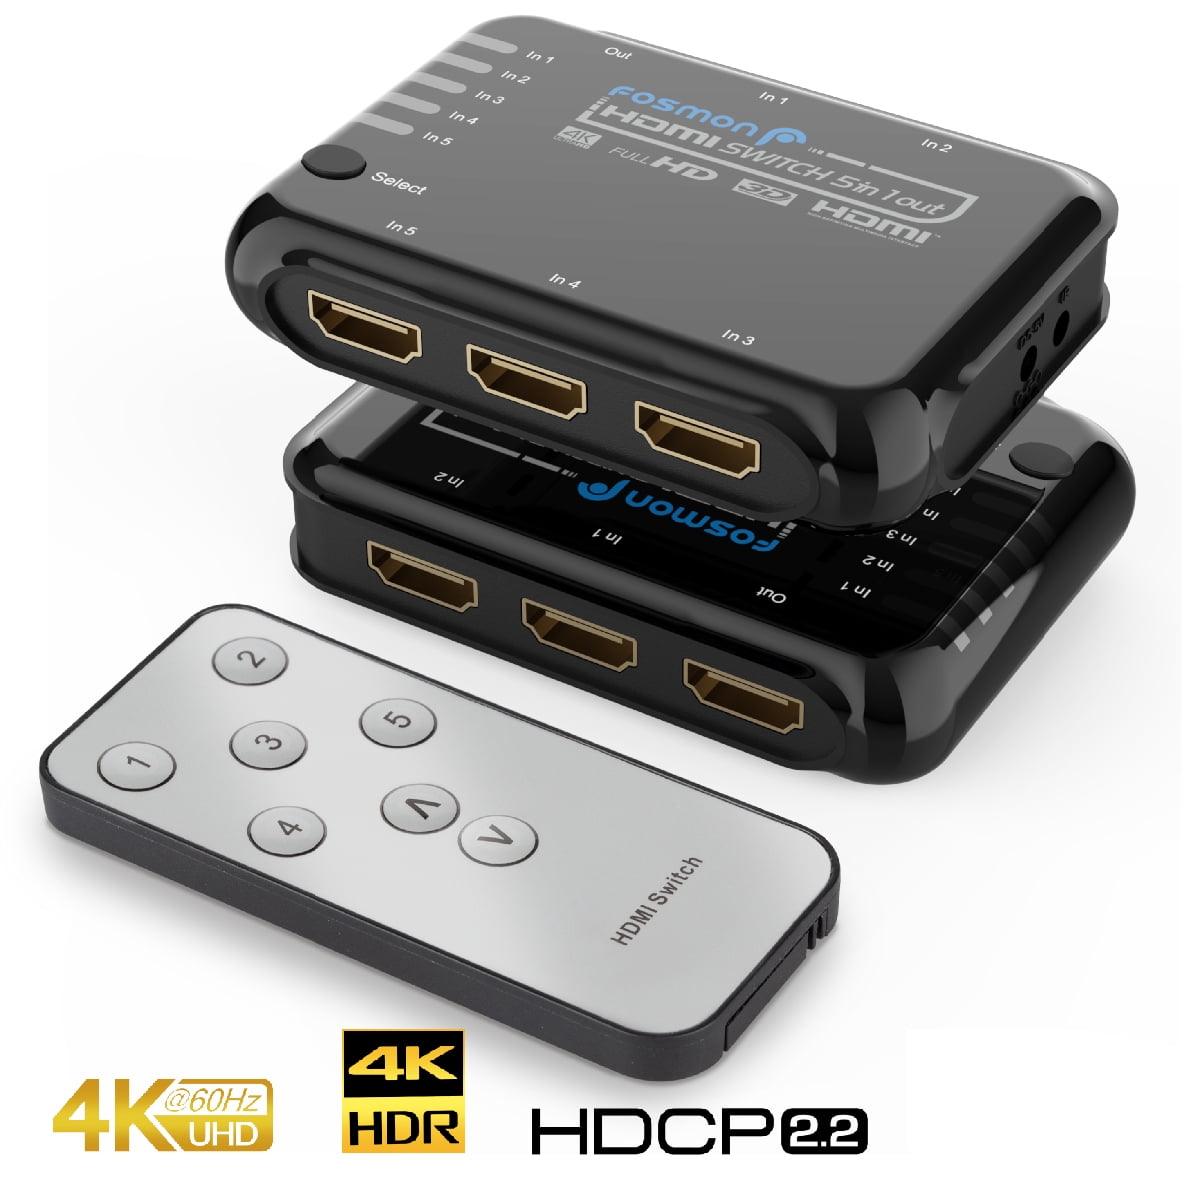 HDMI Switch 4k HDMI Splitter Switch 5 In 1 Out with IR Remote Support 4K 60hz 3D 1080P HDR Plug and Play for PS4/XBOX Ones/Blu-Ray Player/DVD/HDTV/Projector UHD HDCP 2.2